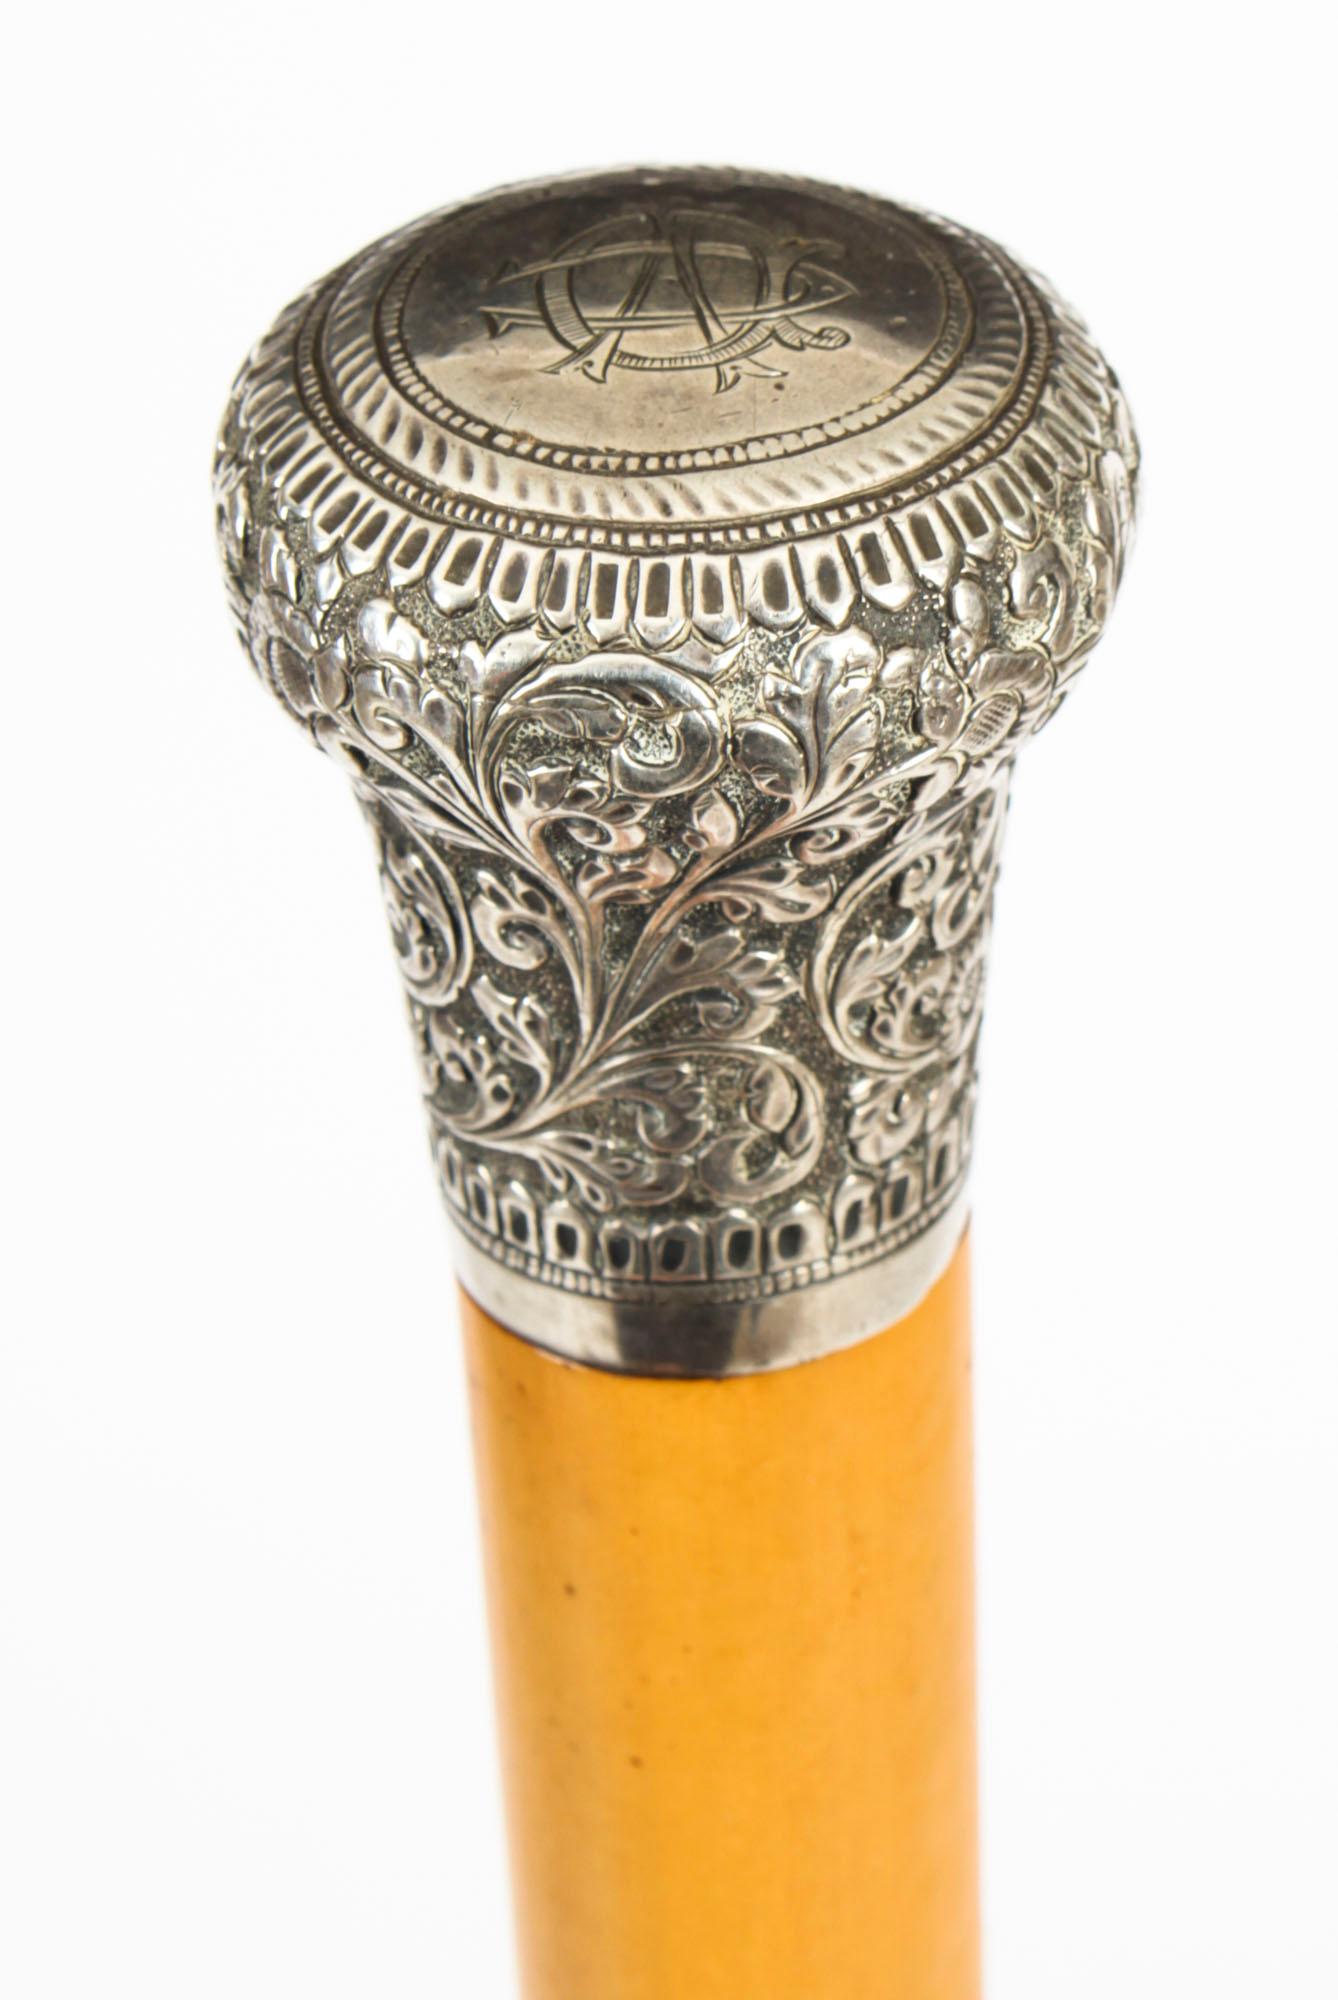 This is a beautiful antique gentleman's silver pommel and malacca shaft Burmese walking stick, circa 1880 in date.
 
This decorative walking cane features an exquisite Burmese silver pommel decorated with exquisitely cast foliate and floral